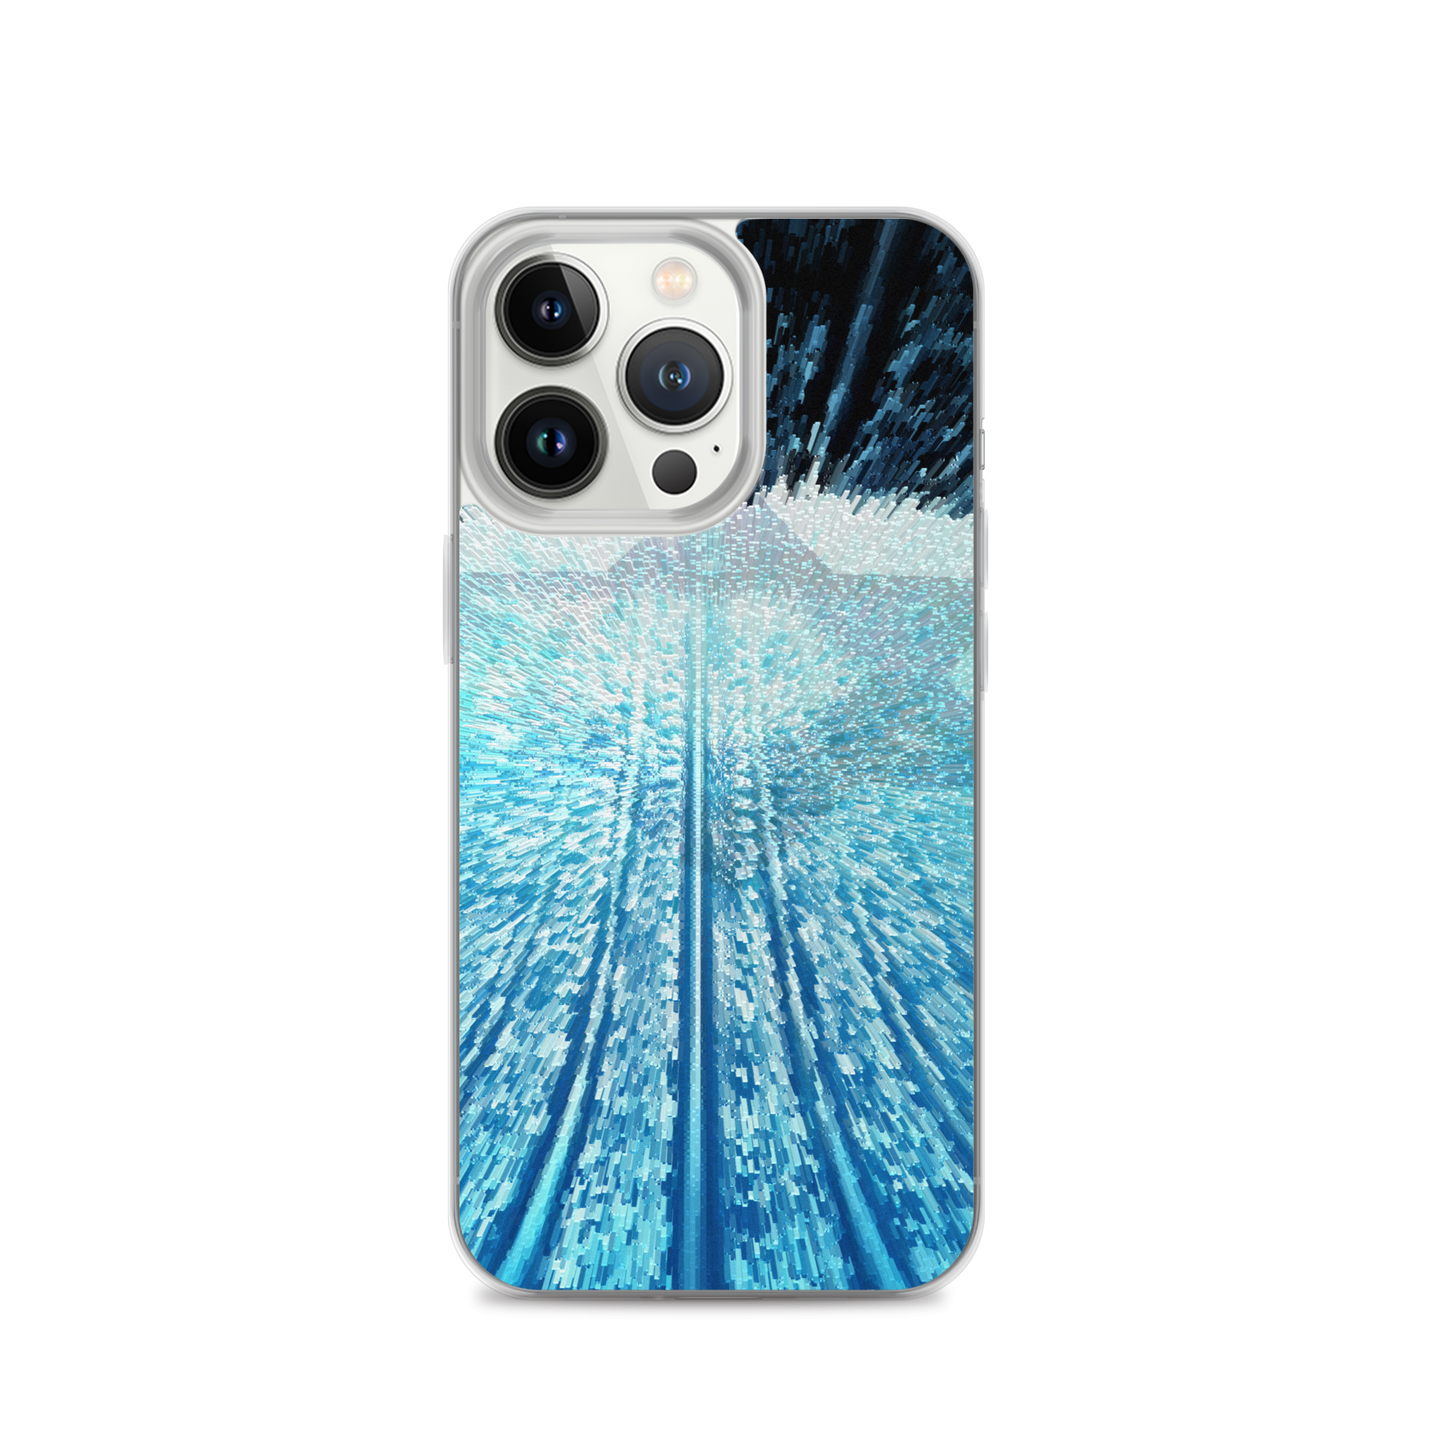 Blue & White iPhone Case